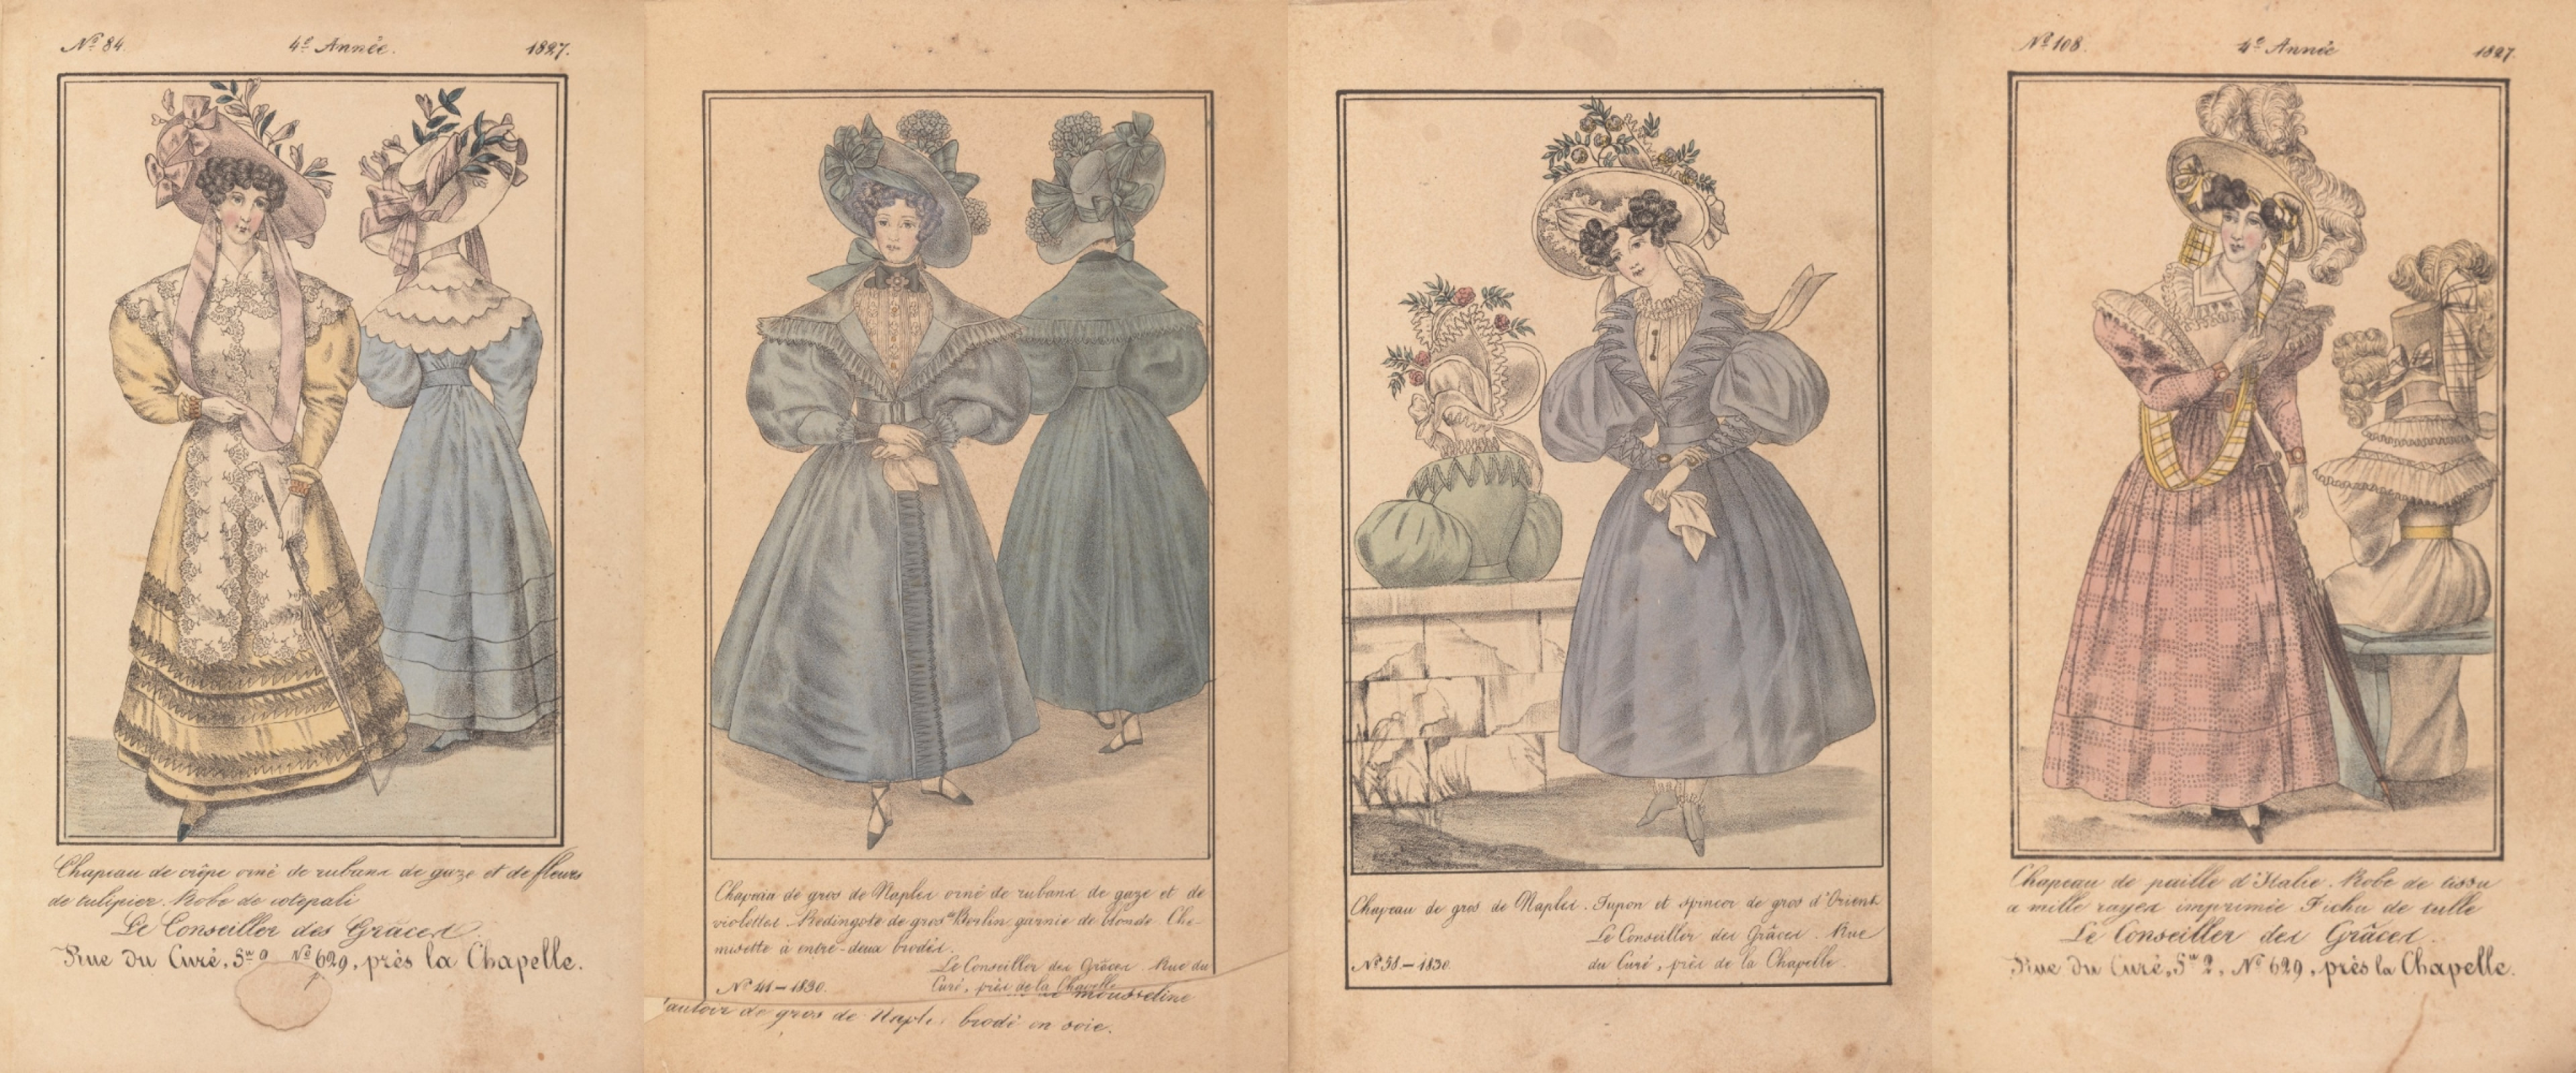 Digital images for four hand colored lithographs from a 19th century French journal.